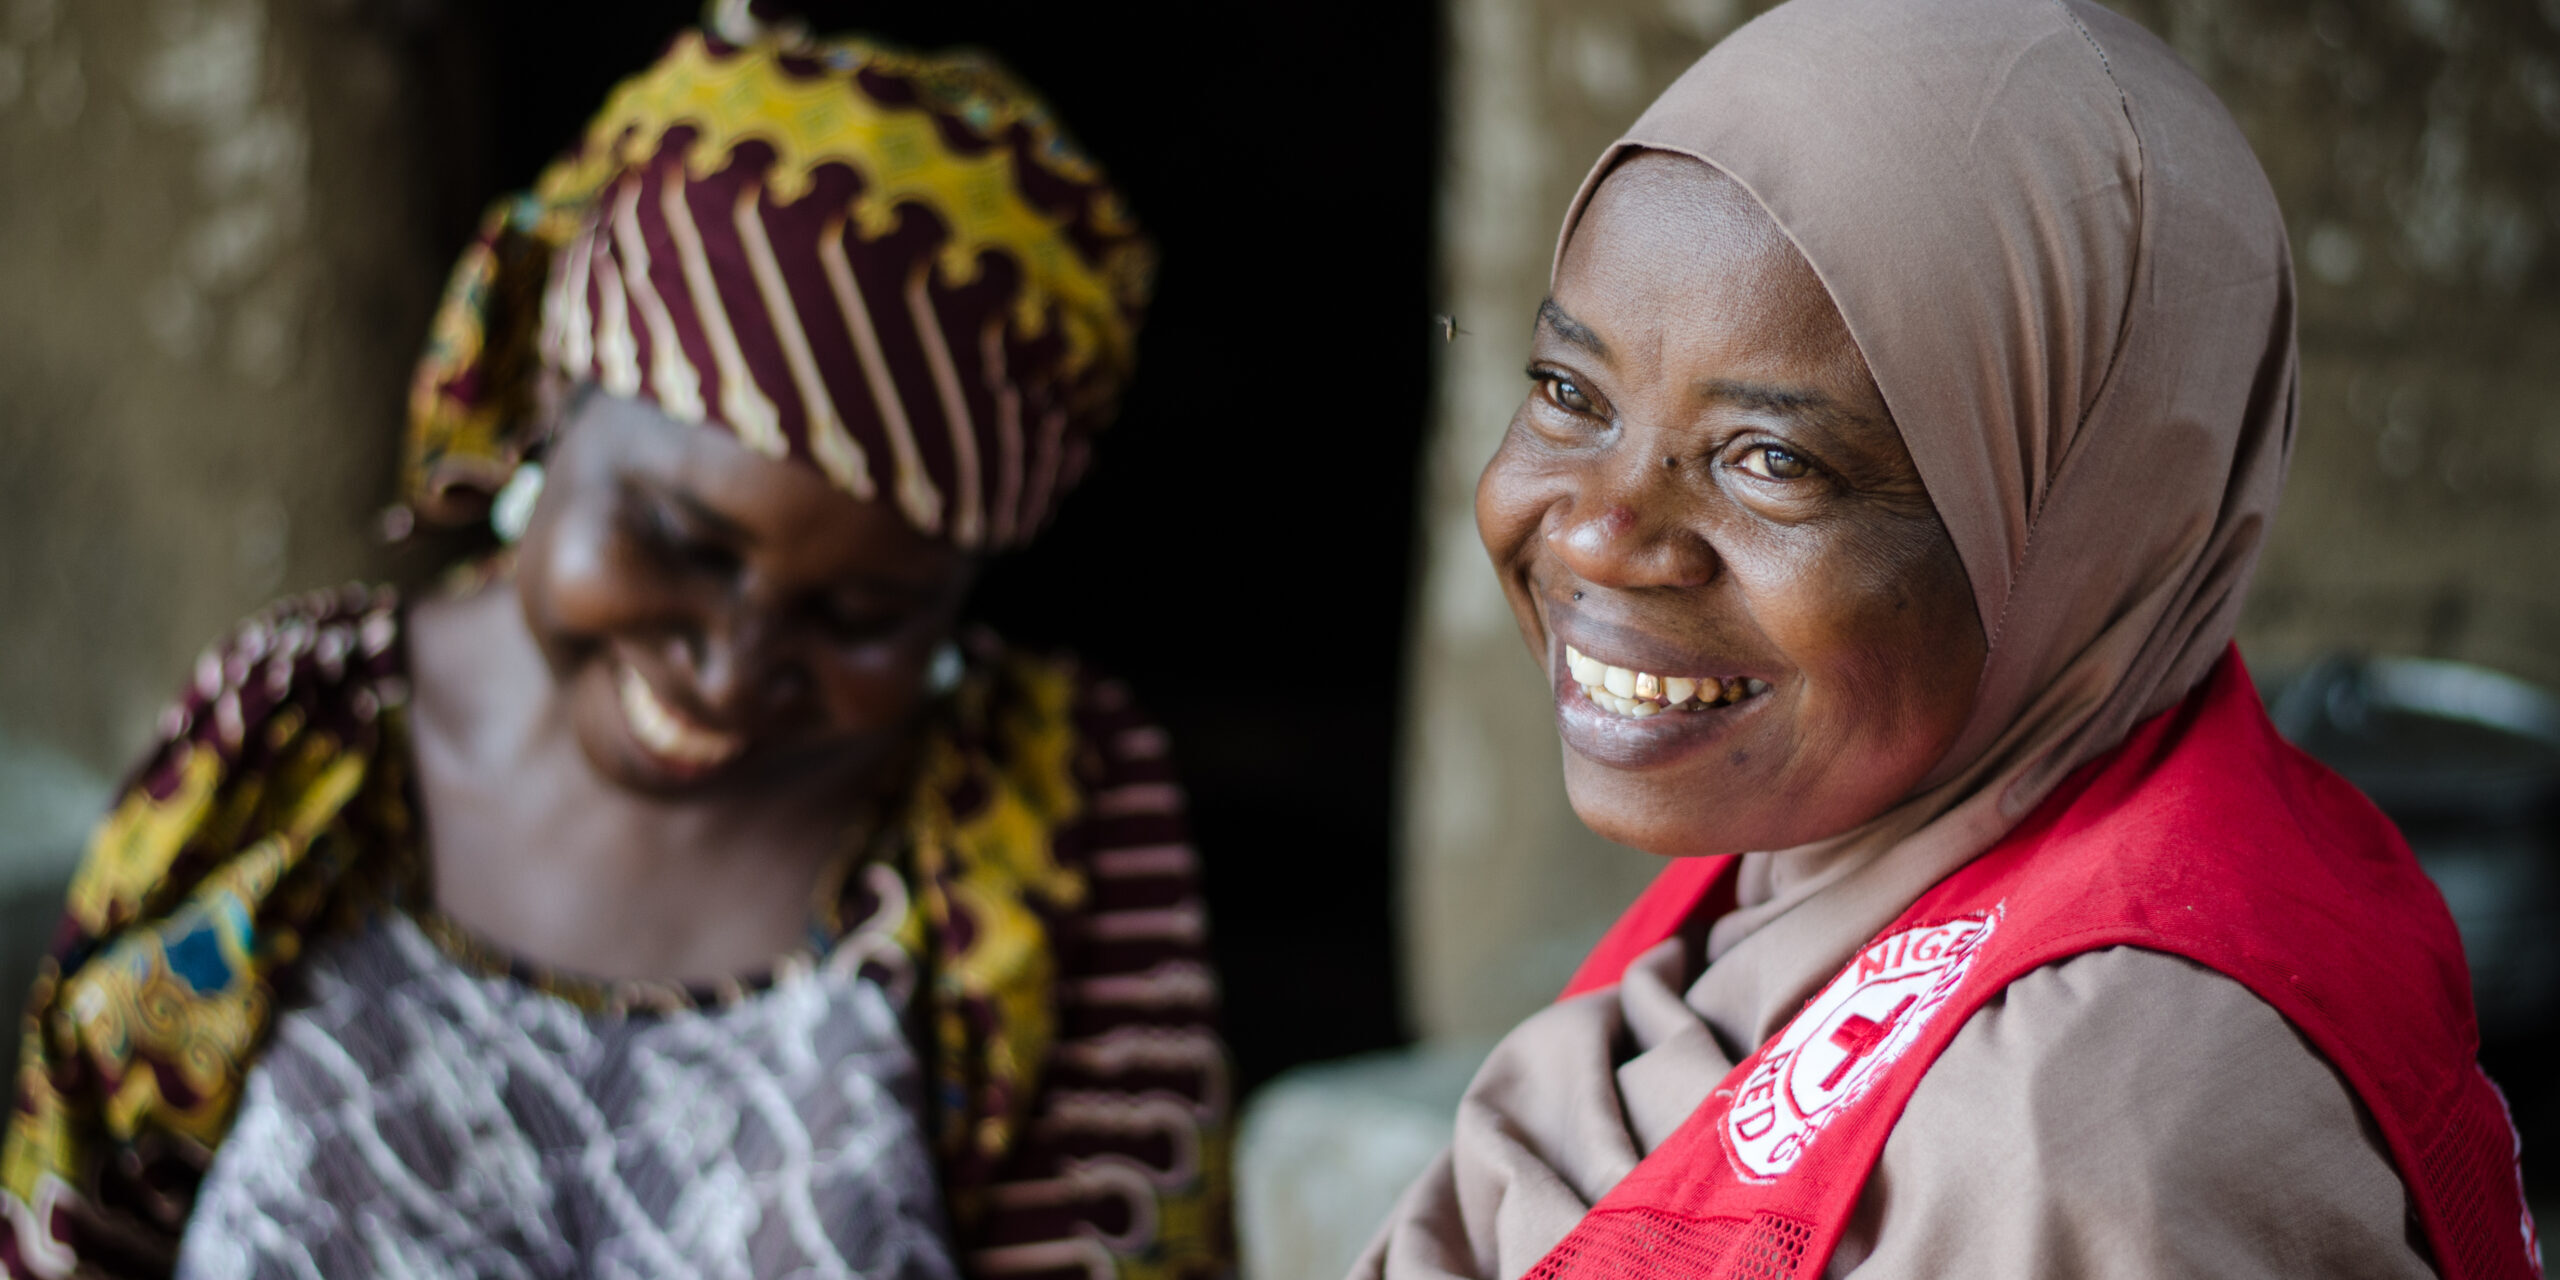 Hawa Magaji sits with Nigerian Red Cross divisional secretary of Song. During the armed conflict in north east Nigeria in 2014, Hawa`s community was attacked. She escaped with her family to safety. But just over a month later, she knew she needed to come back. 
On her returned, her goats and grains, including maize and groundnuts, were gone. With the help of the Nigerian Red Cross, Hawa has received enough money to invest back into her livelihood. She has bought seven goats, fertilizer for her farm and food to sustain her until her crops grow. She has also been able to renovate the foundations of her home where of her children reside.
The Red Cross is providing money for families, like Hawas, to enhance their ability to earn an income and feed their family. Cash has been distributed to people in Hong, Gombi and Song, allowing them to respond to their own unique needs and take charge of their recovery.
Smiling alone cannot express how happy I am, because I have never received any help like this in my life, says Hawa.
By the end of 2018, IFRC will support the Nigerian Red Cross in providing assistance to 360,000 people in three areas of Adamawa State (Gombi, Hong and Song) with food, shelter, sanitation and hygiene, community health services, cash and livelihoods projects.